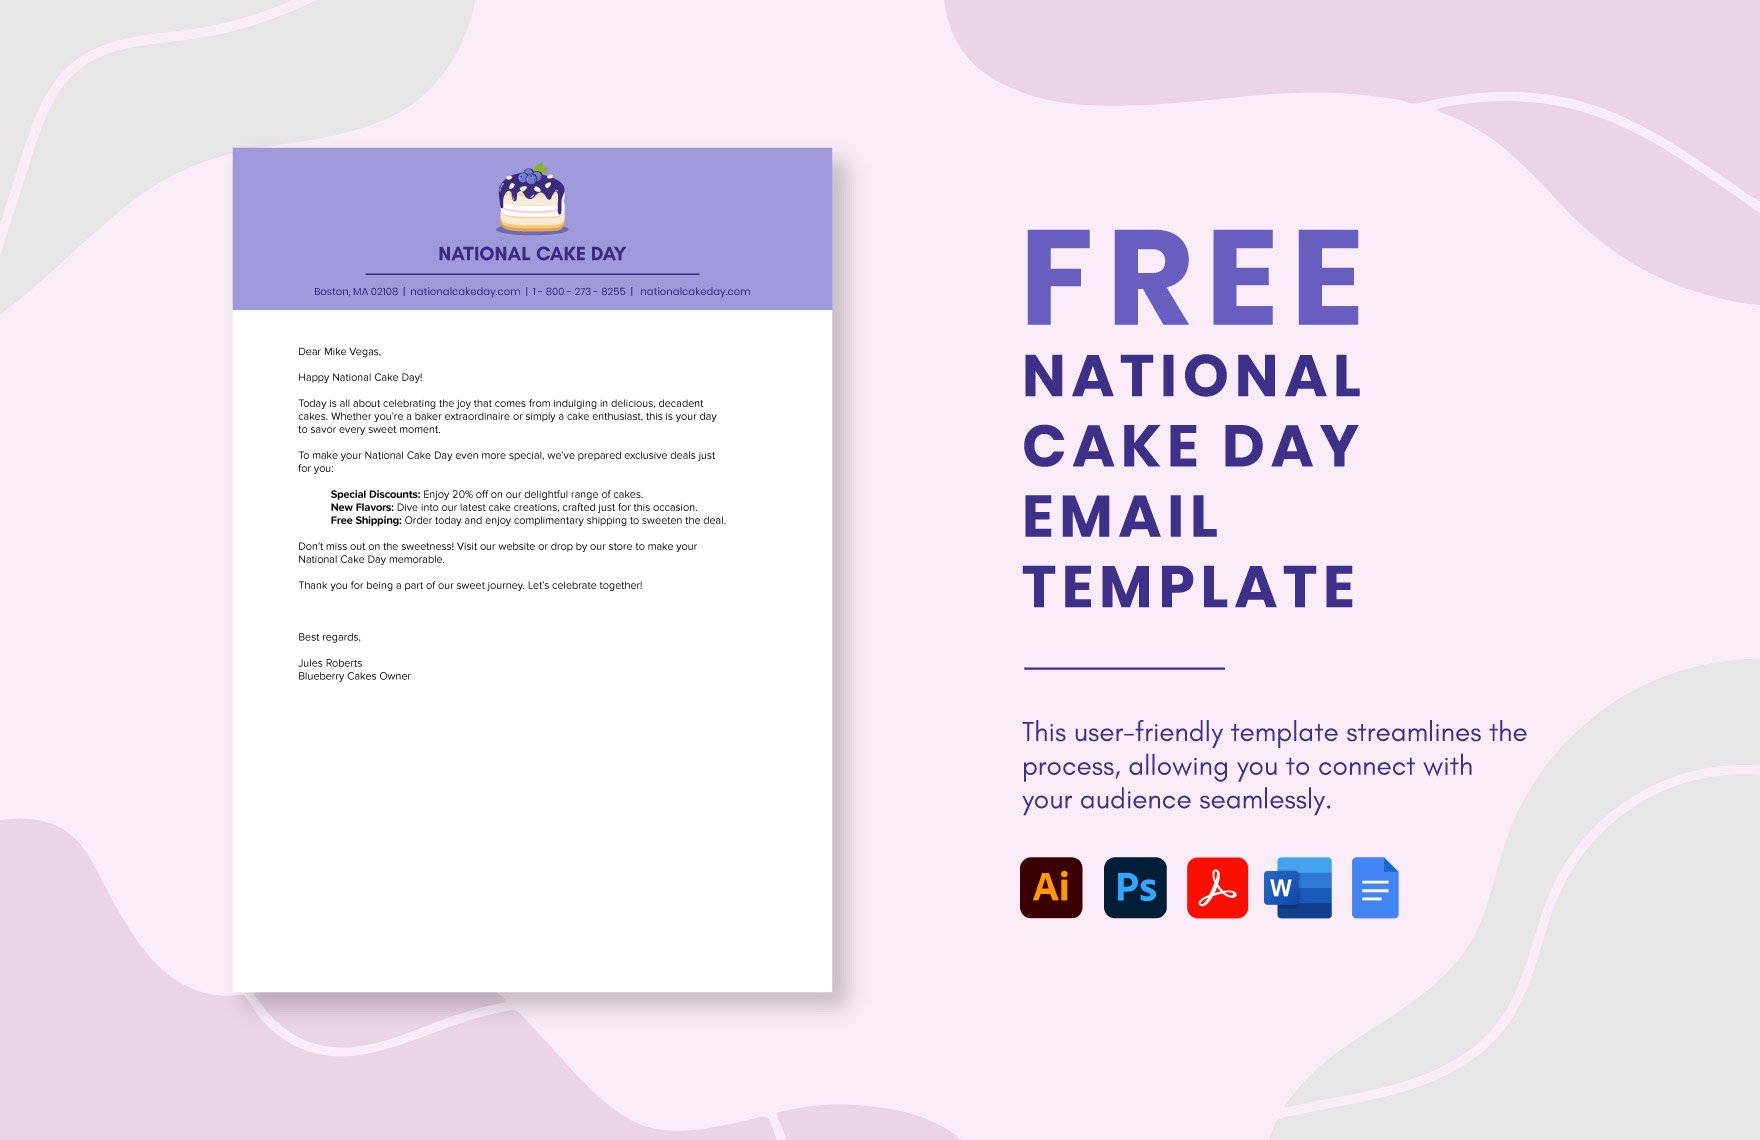 Email Template in Illustrator, Vector, Image